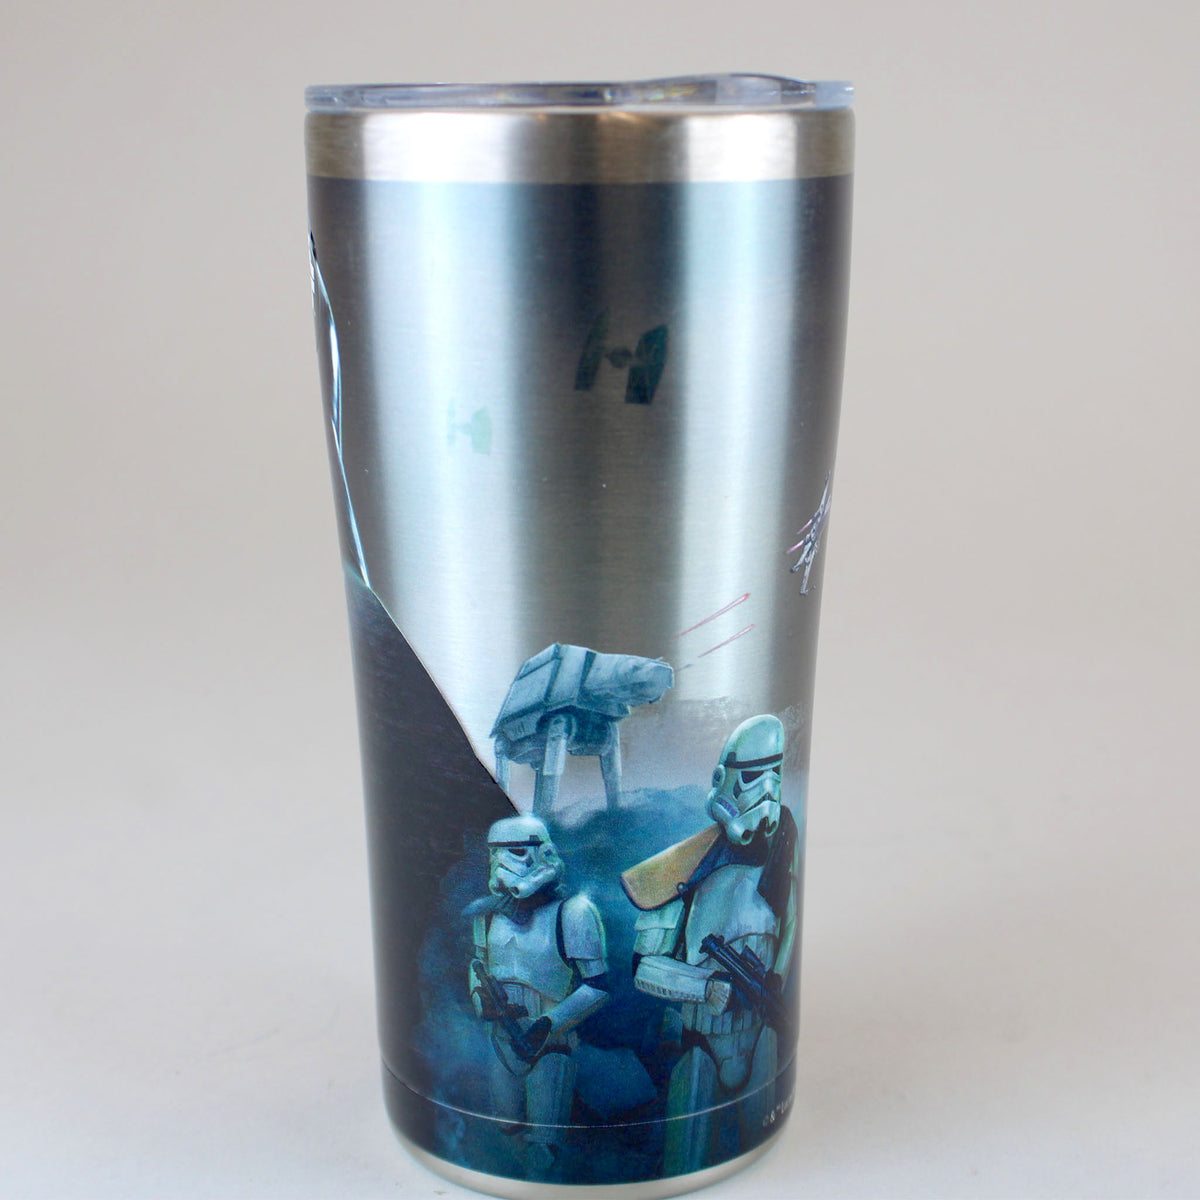 Darth Vader Tervis 20oz Stainless Steel Travel Mug – Collector's